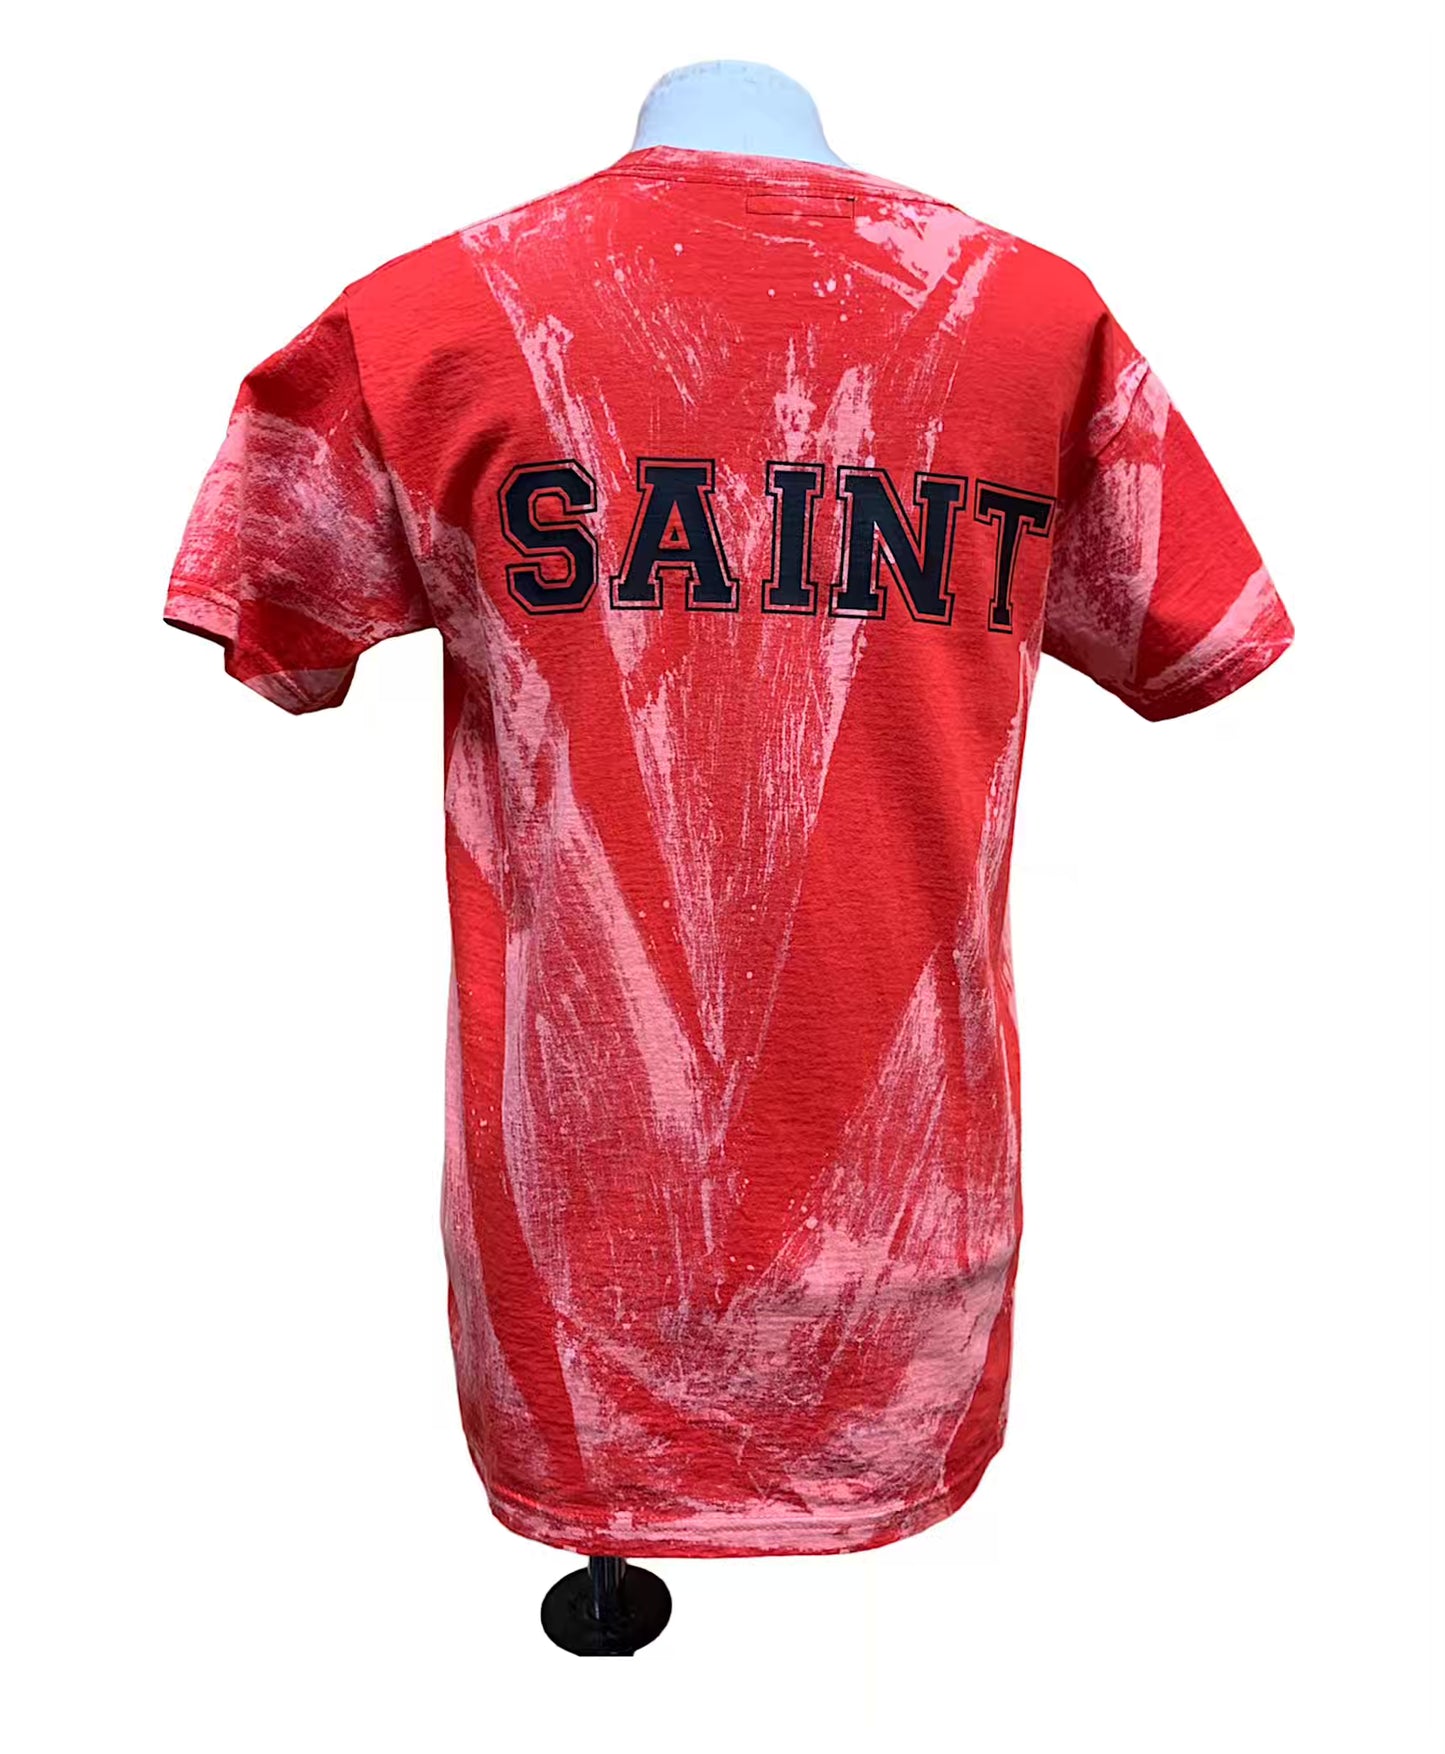 Partxis Red S T-shirt